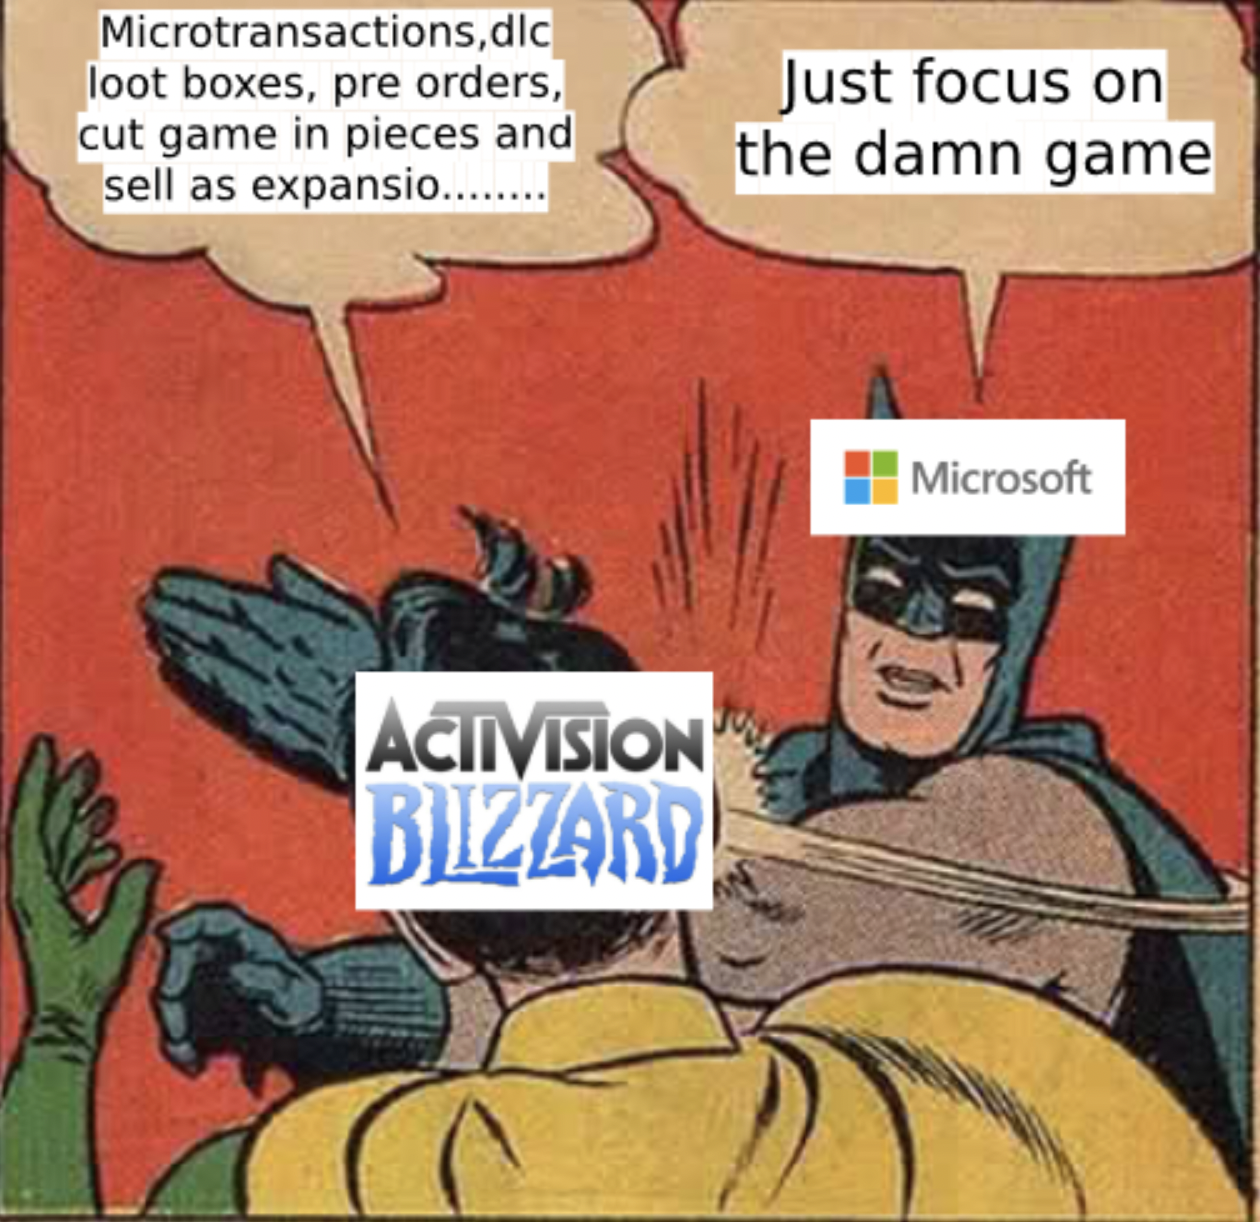 gaming memes - cartoon - Microtransactions,dic loot boxes, pre orders, cut game in pieces and sell as expansio........ Activision Bizzard Just focus on the damn game Microsoft